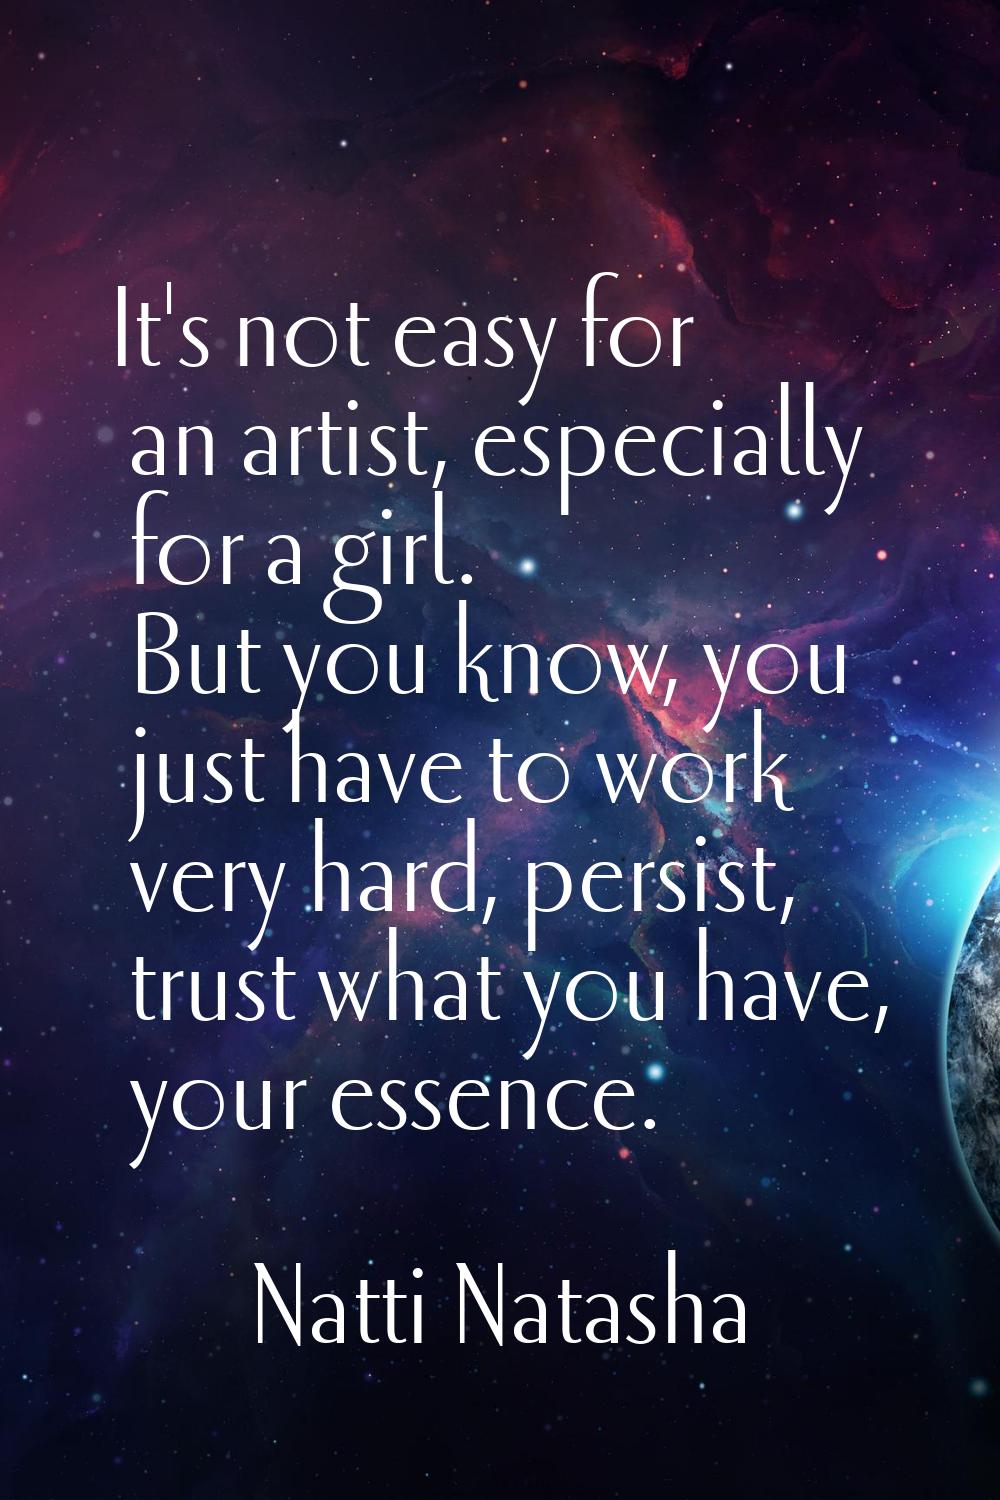 It's not easy for an artist, especially for a girl. But you know, you just have to work very hard, 